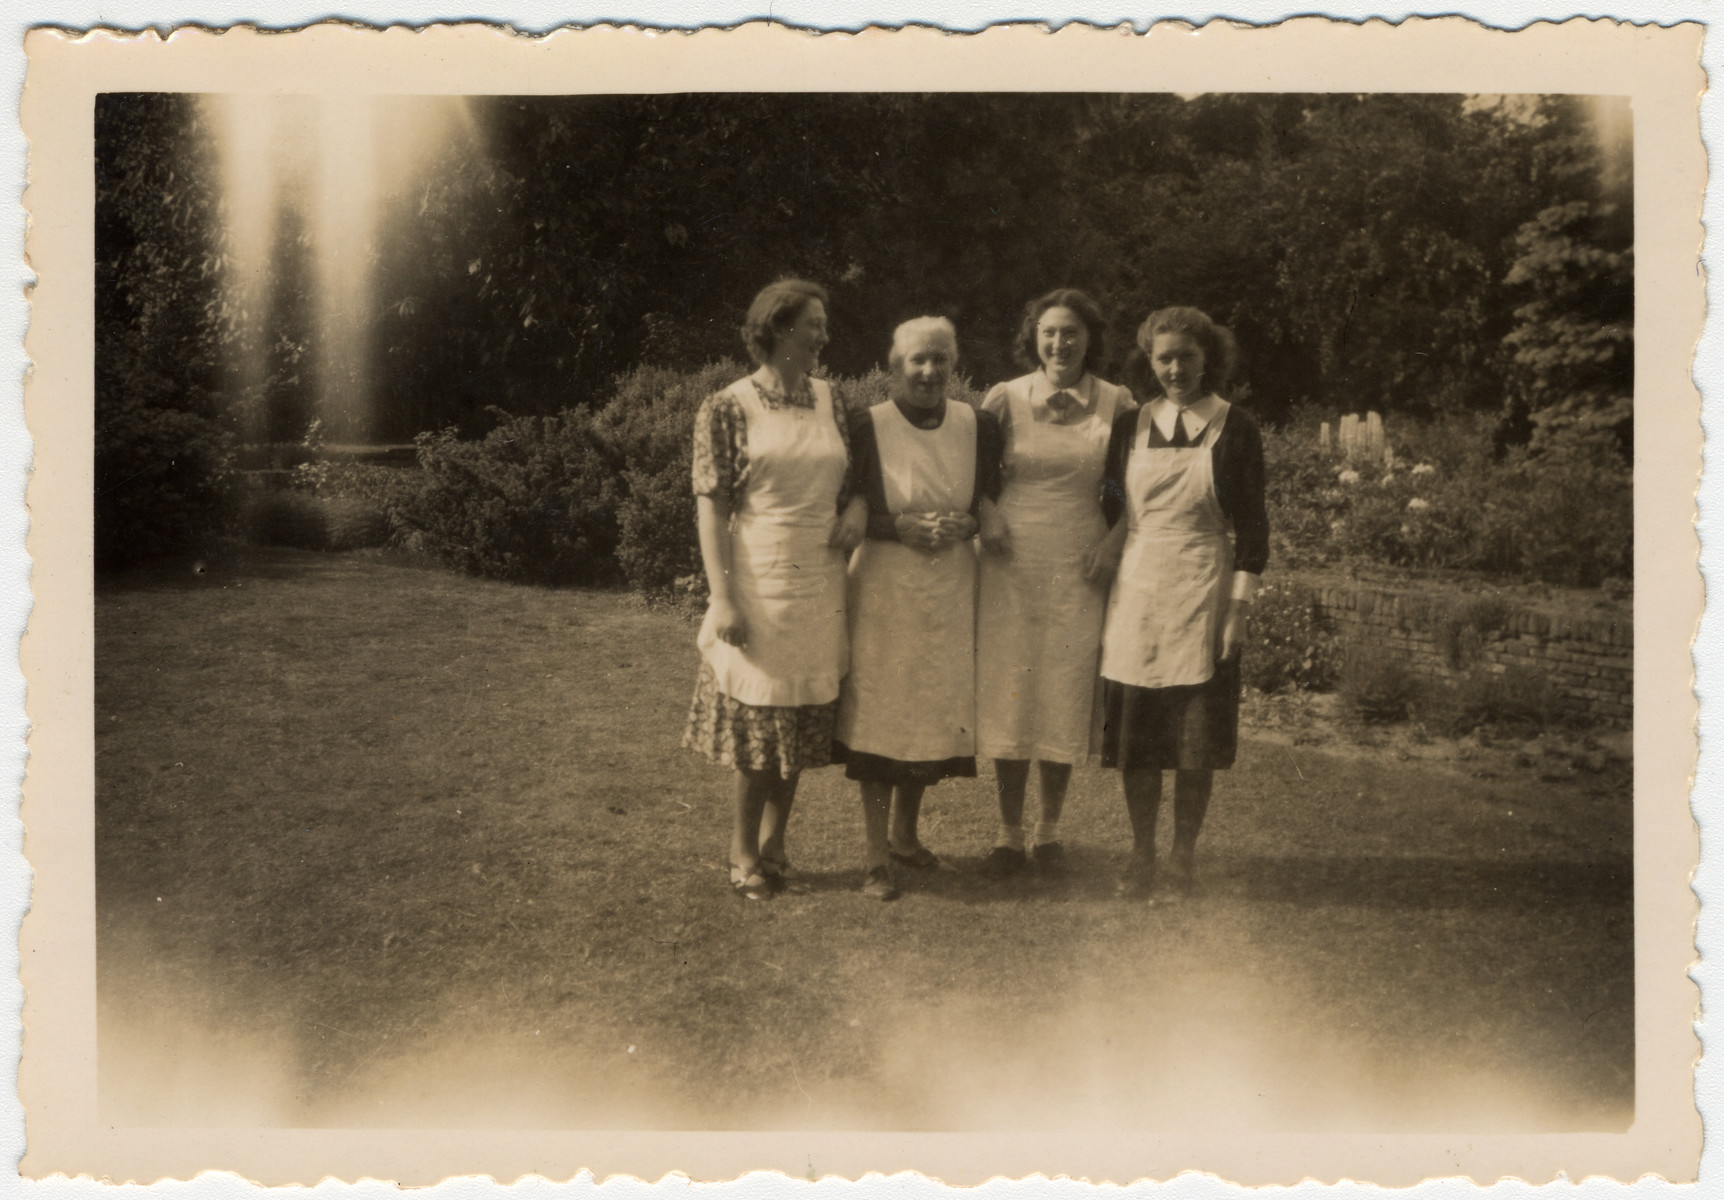 Group portrait of the van Dam family prior to their going into hiding.  

Pictured are Hettie, Clara, Minnie and Edith van Dam.